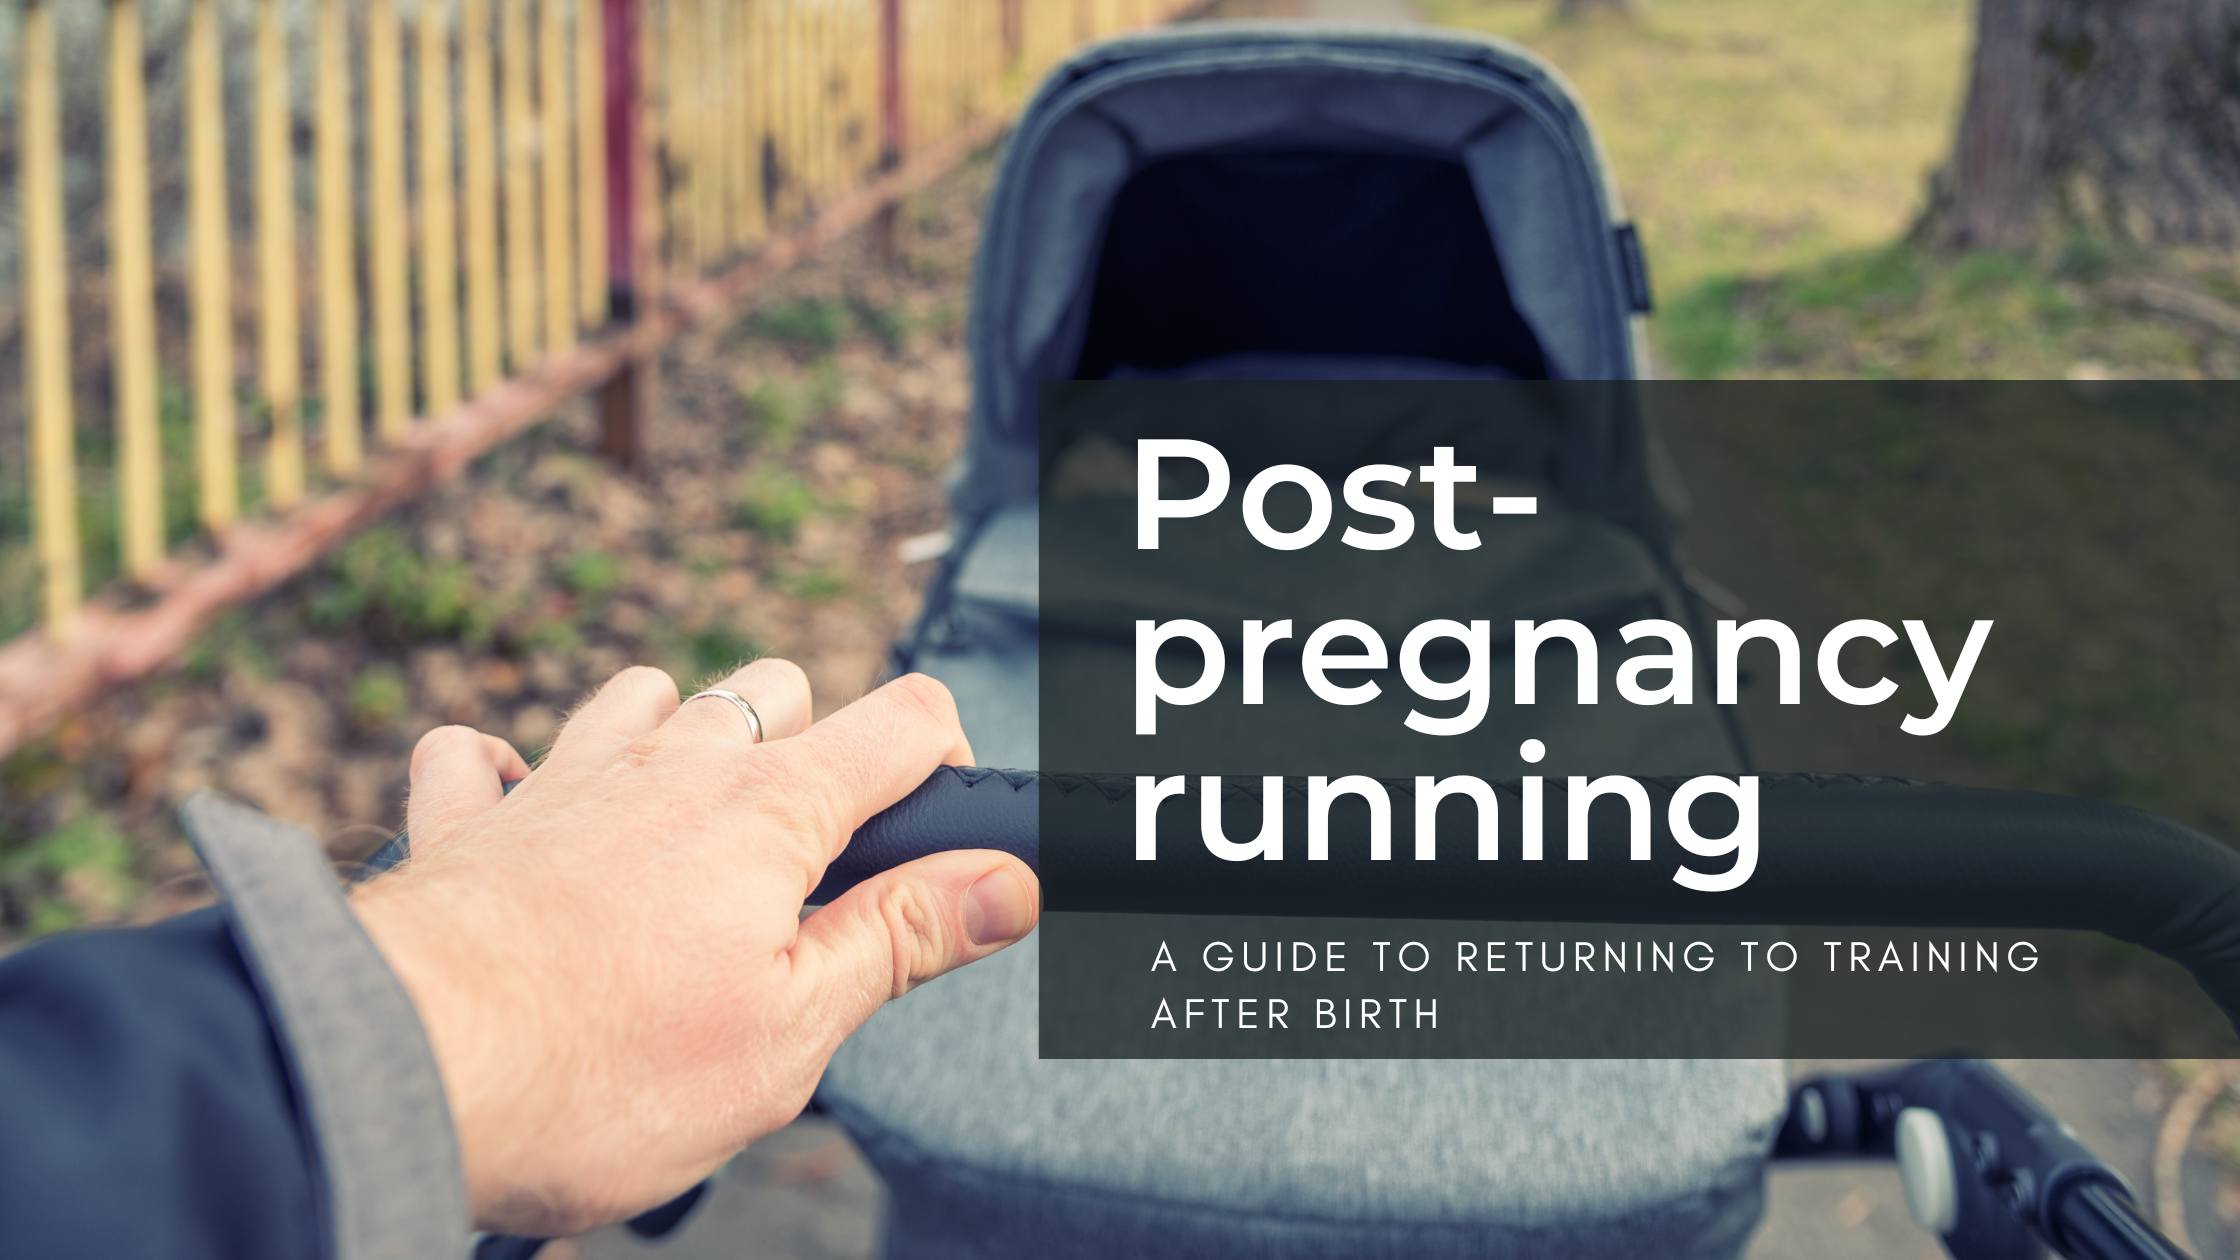 A guide to returning to running after pregnancy